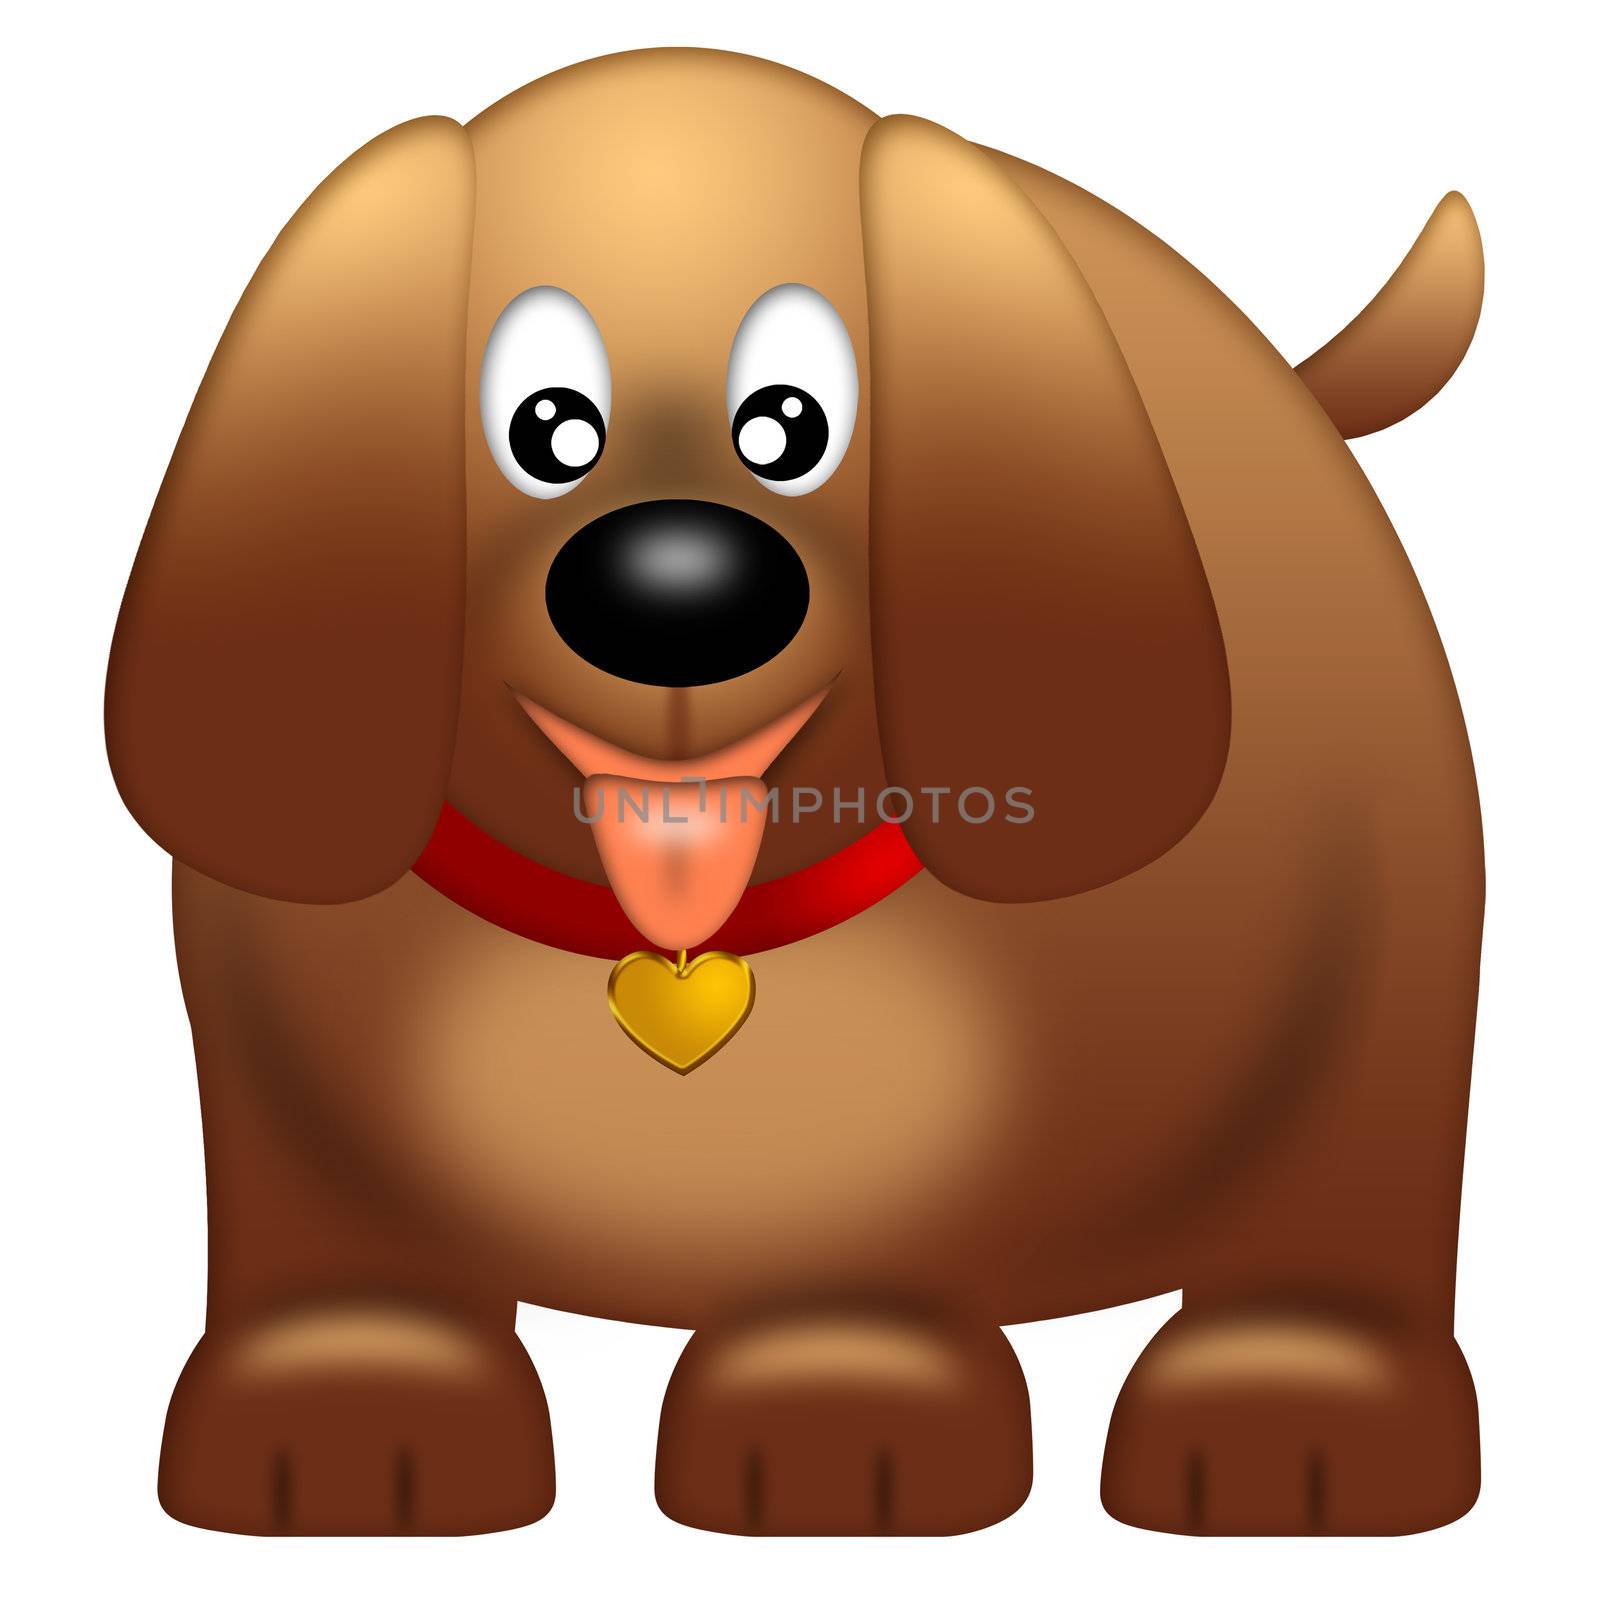 Cute Puppy Dog with Red Collar Isolated on White Background Illustration